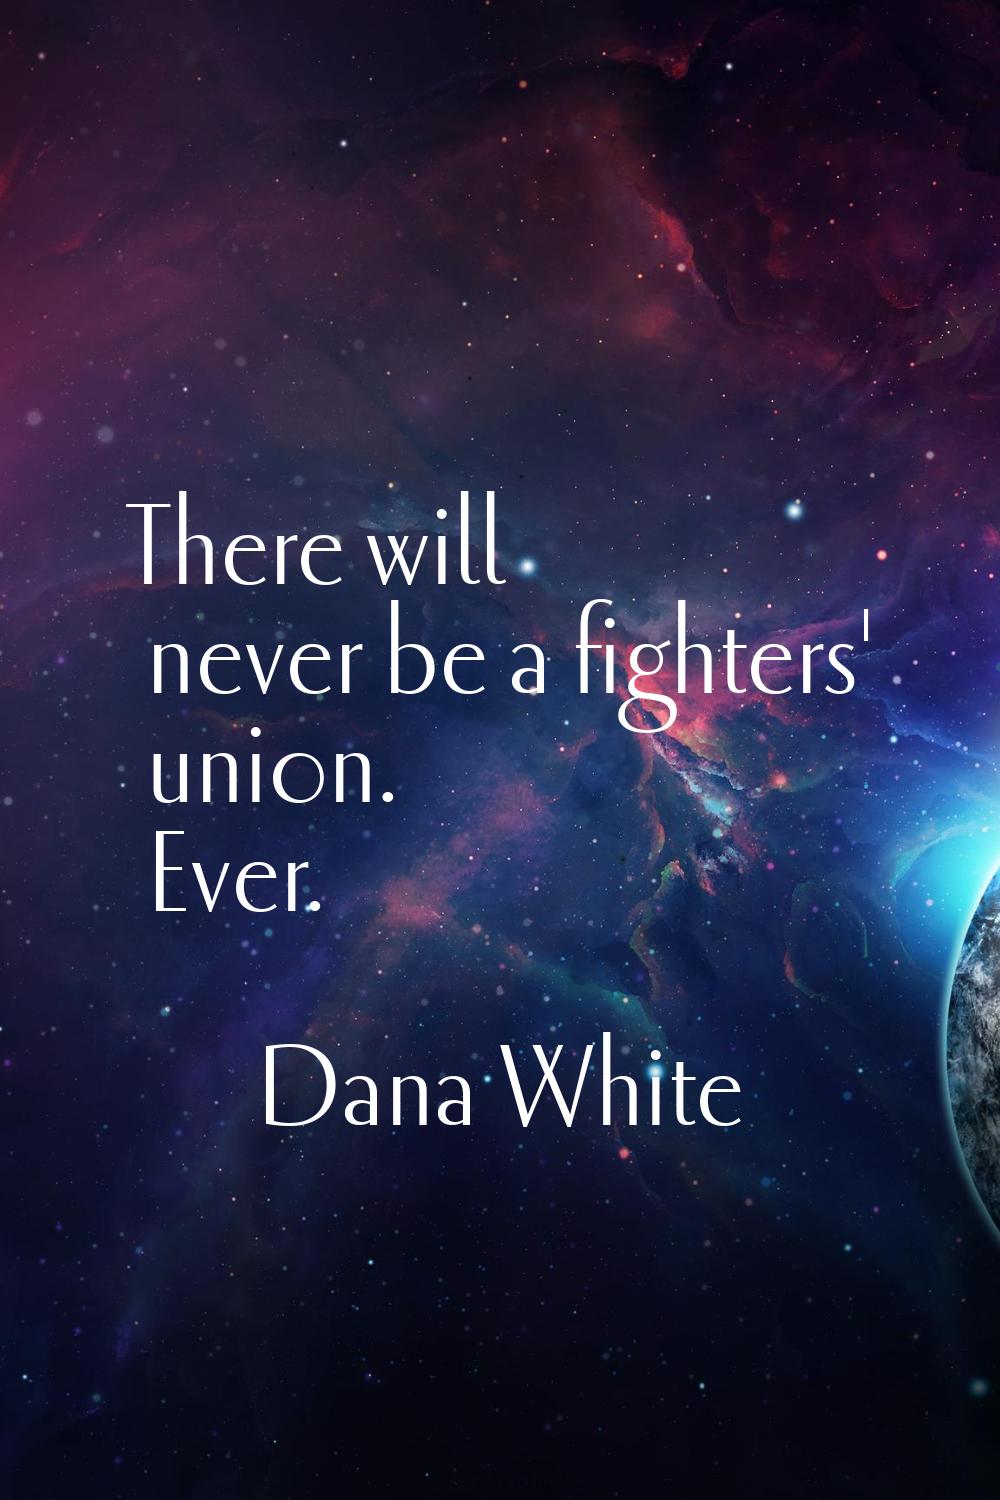 There will never be a fighters' union. Ever.